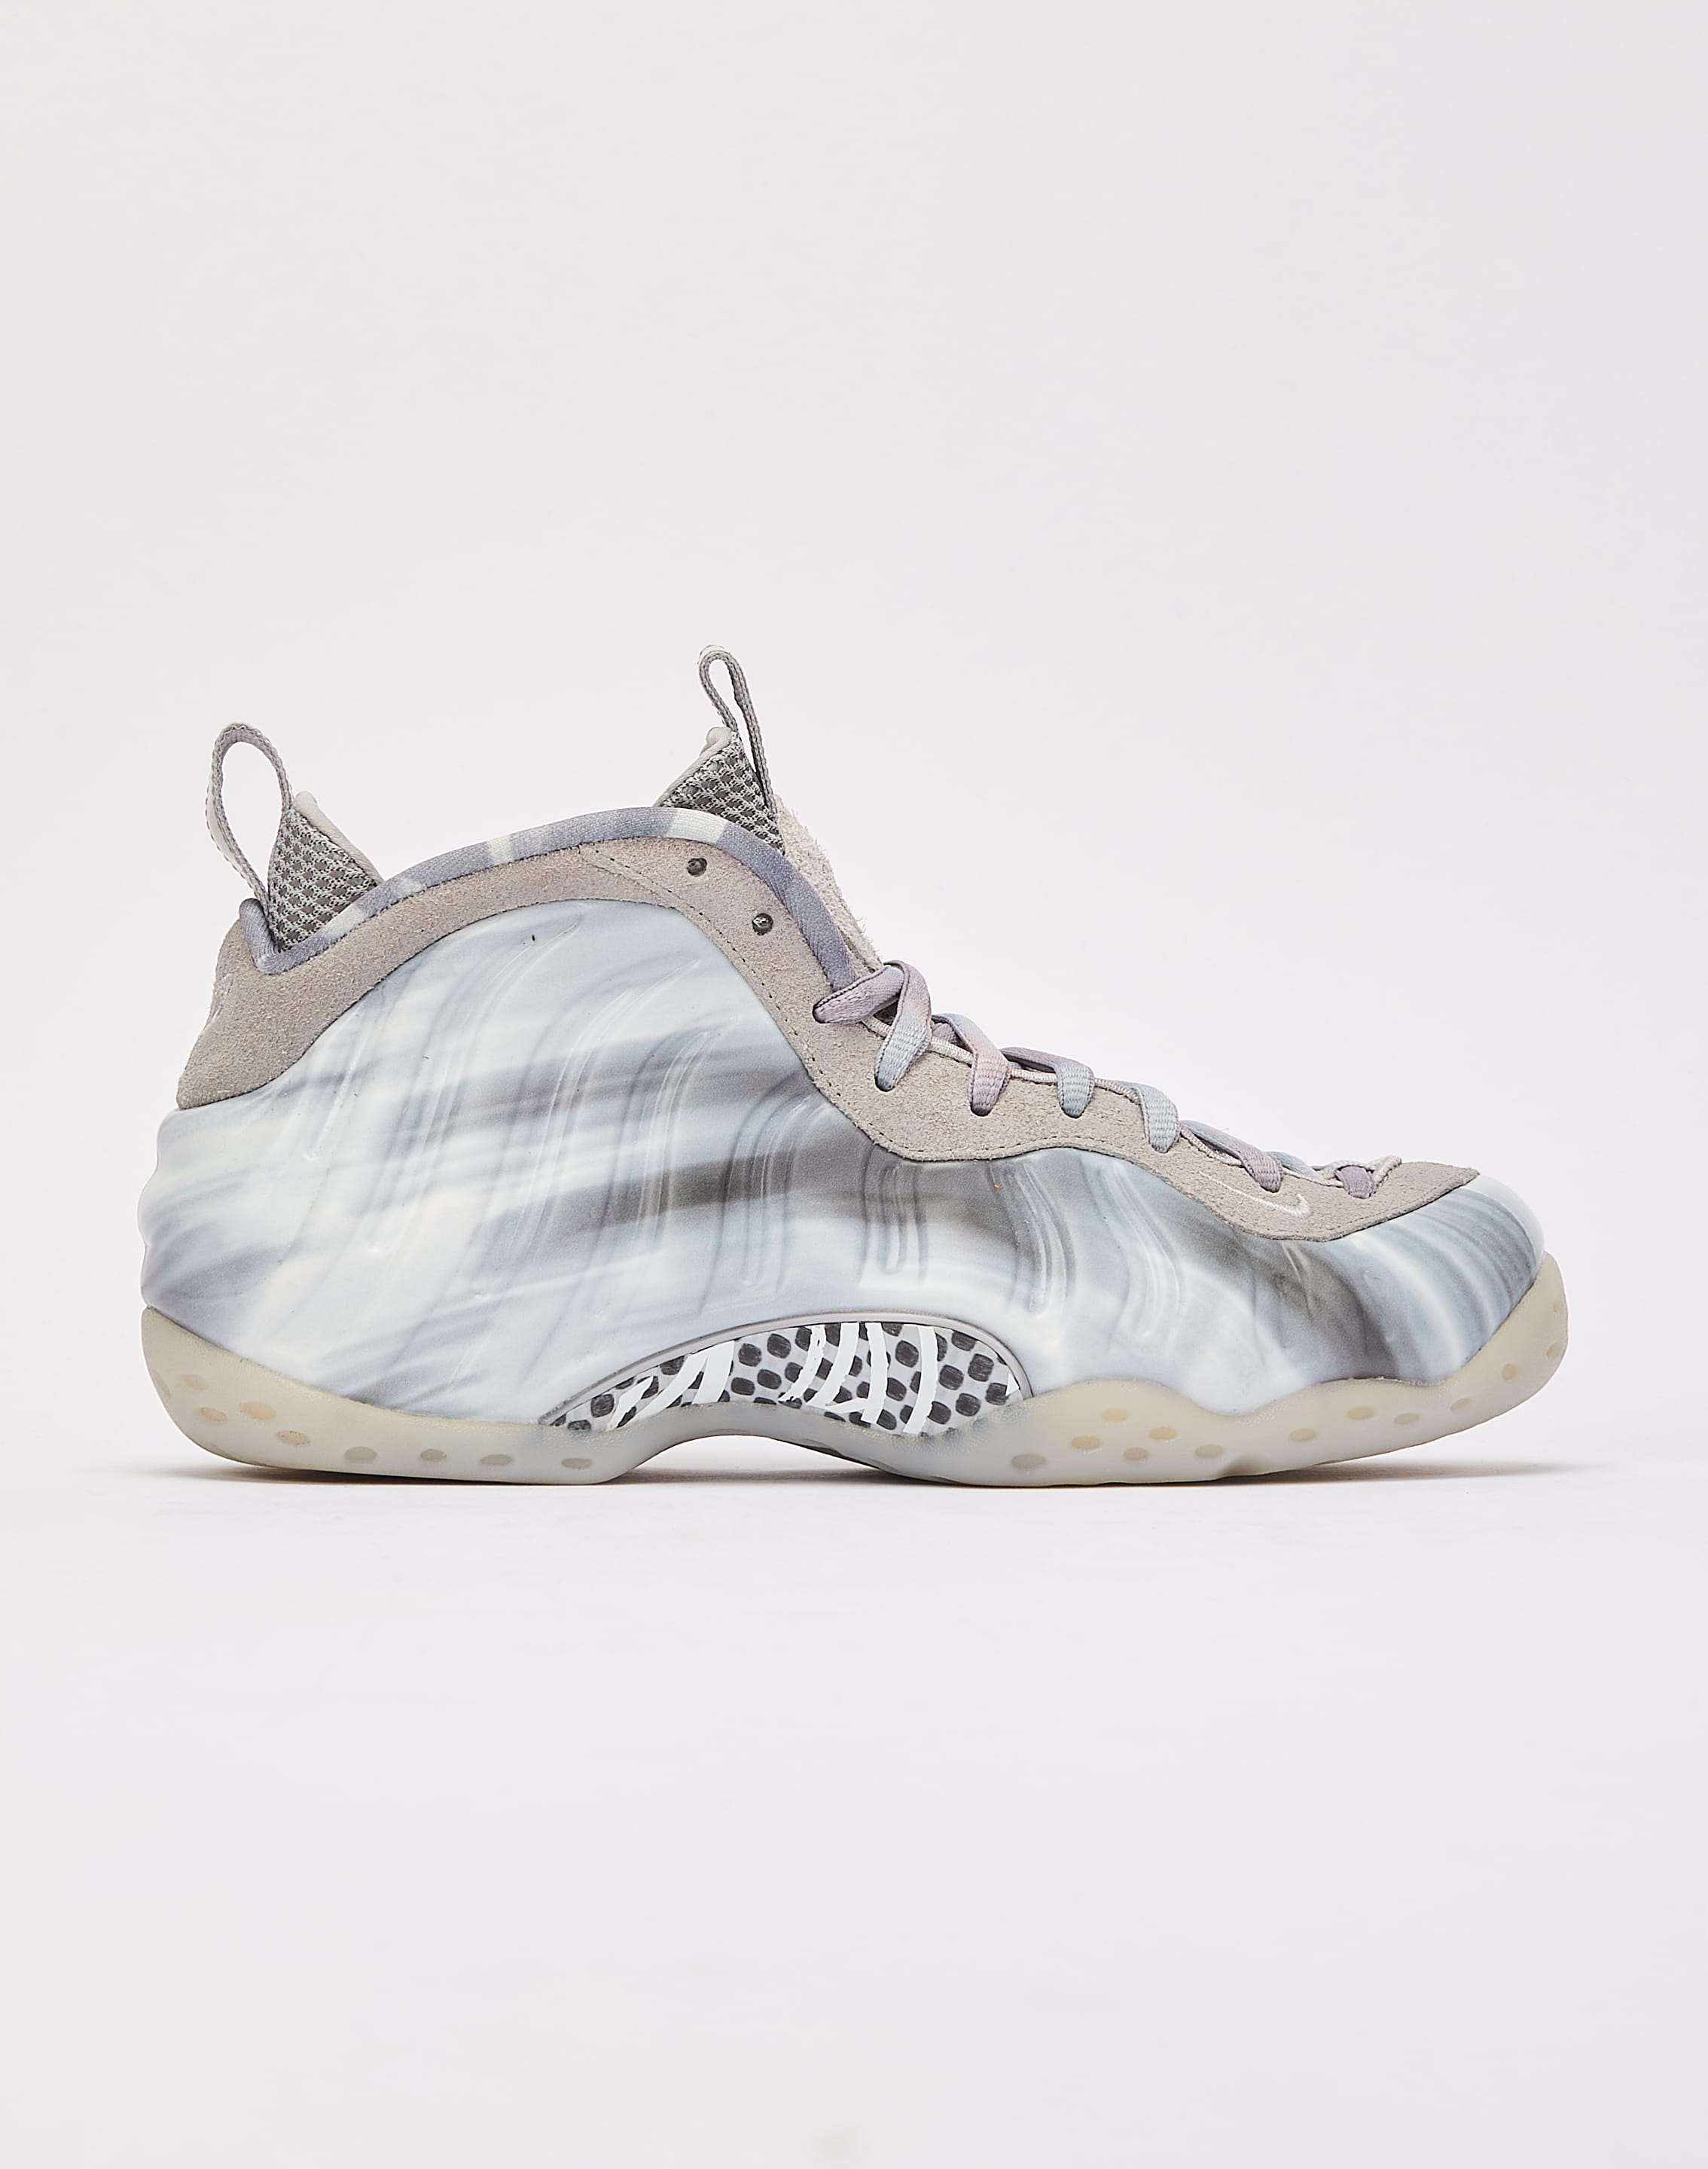 Where to Buy the Nike Air Foamposite One “Tech Grey” – DTLR